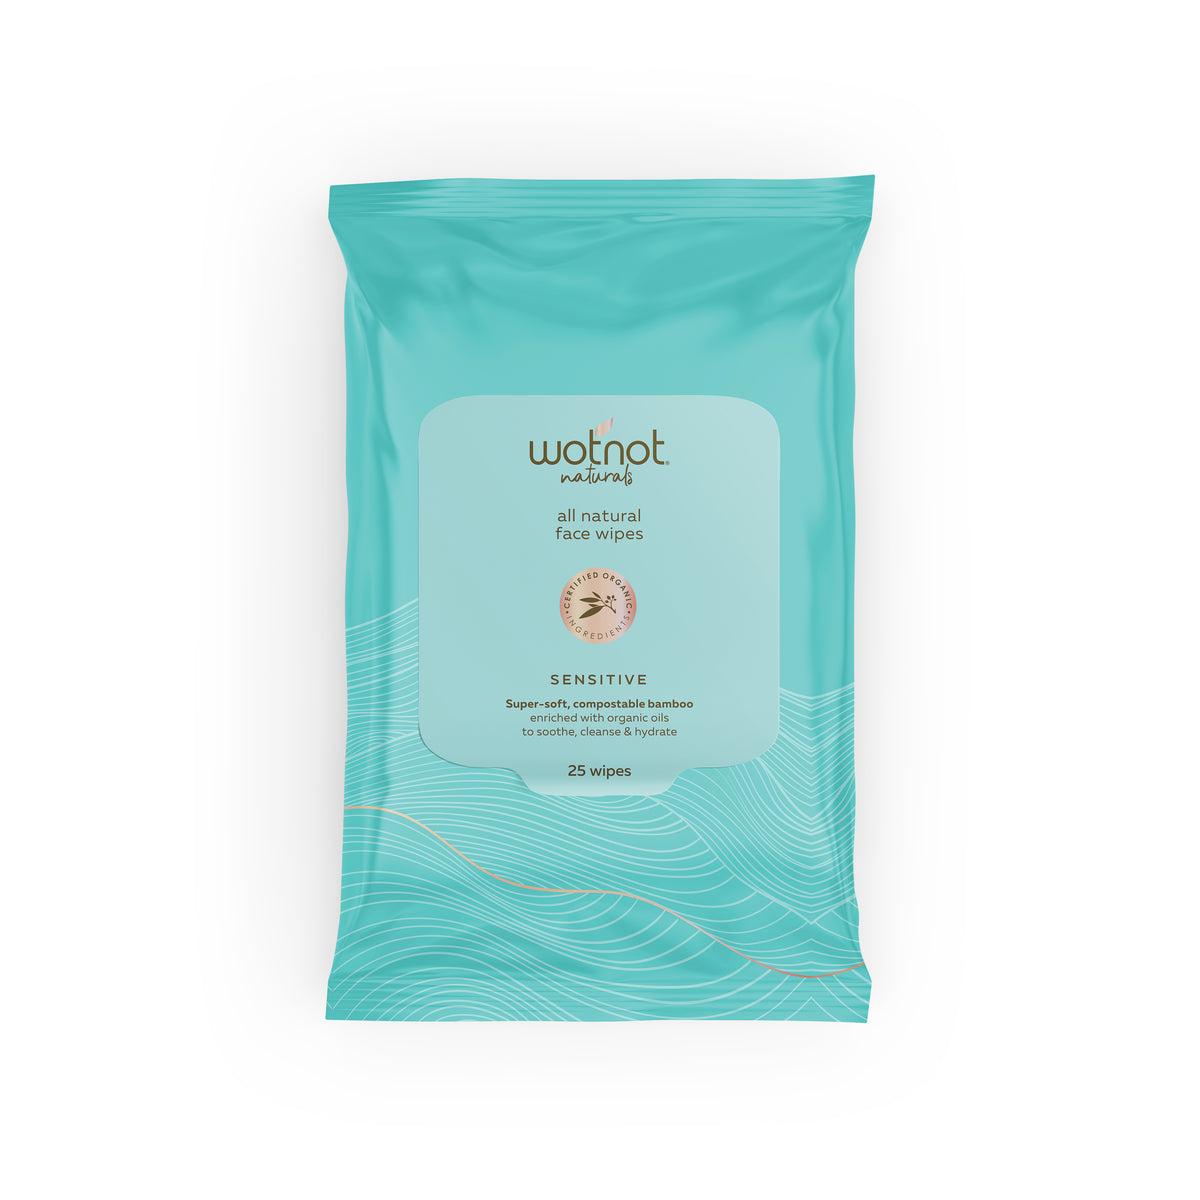 Wotnot Natural Face Wipes Soft Sensitive - All Skin Types 25pk